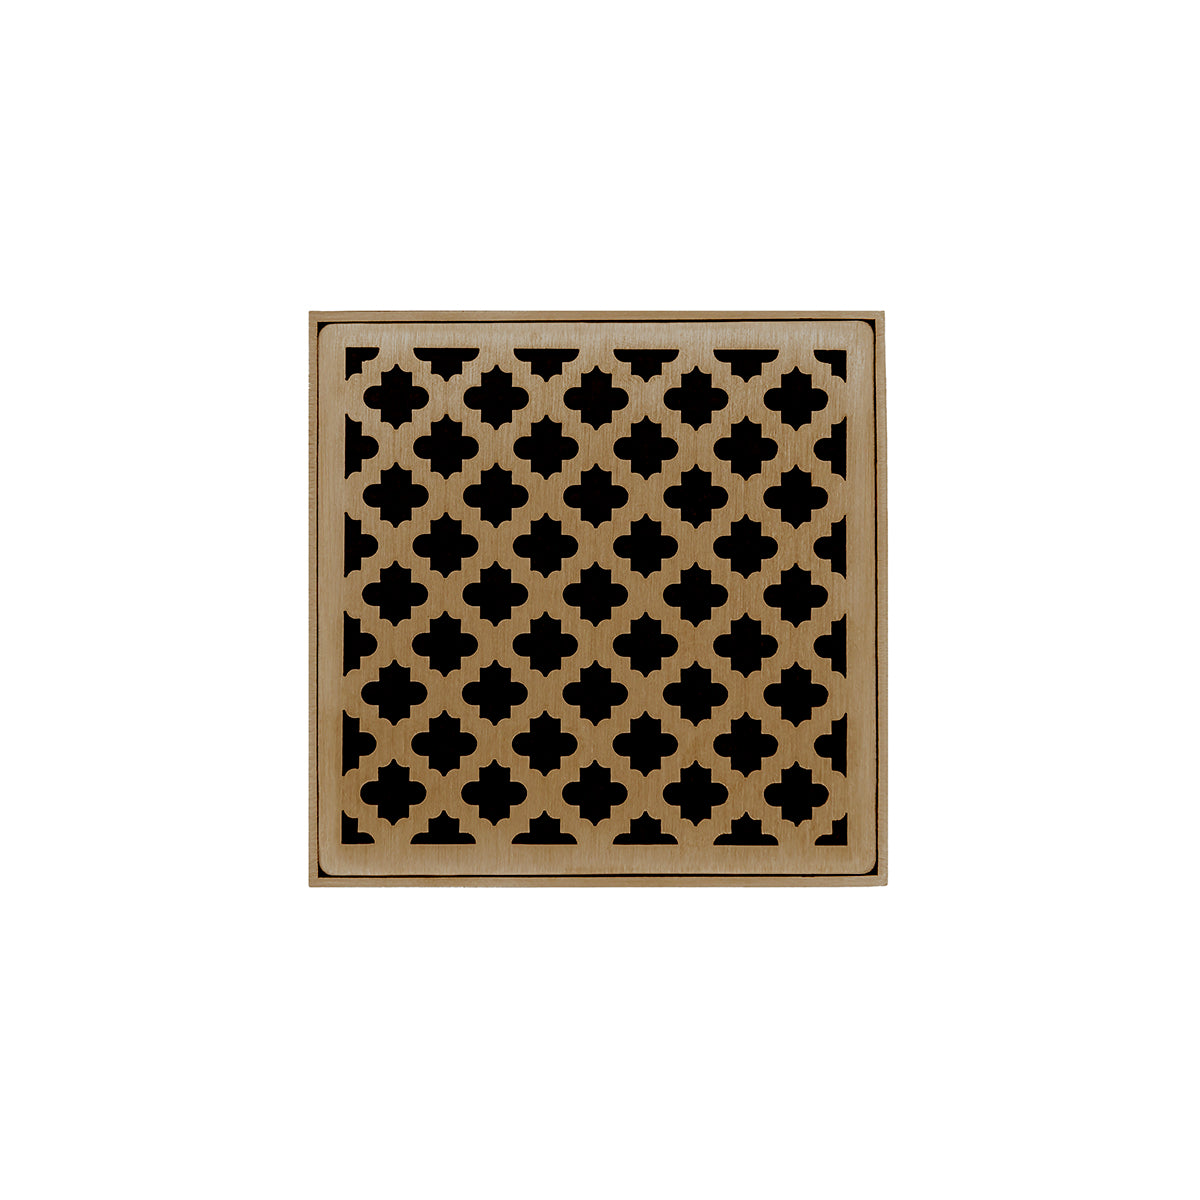 Infinity Drain 4" x 4" MD 4 Premium Center Drain Kit with Moor Pattern Decorative Plate with ABS Drain Body, 2" Outlet